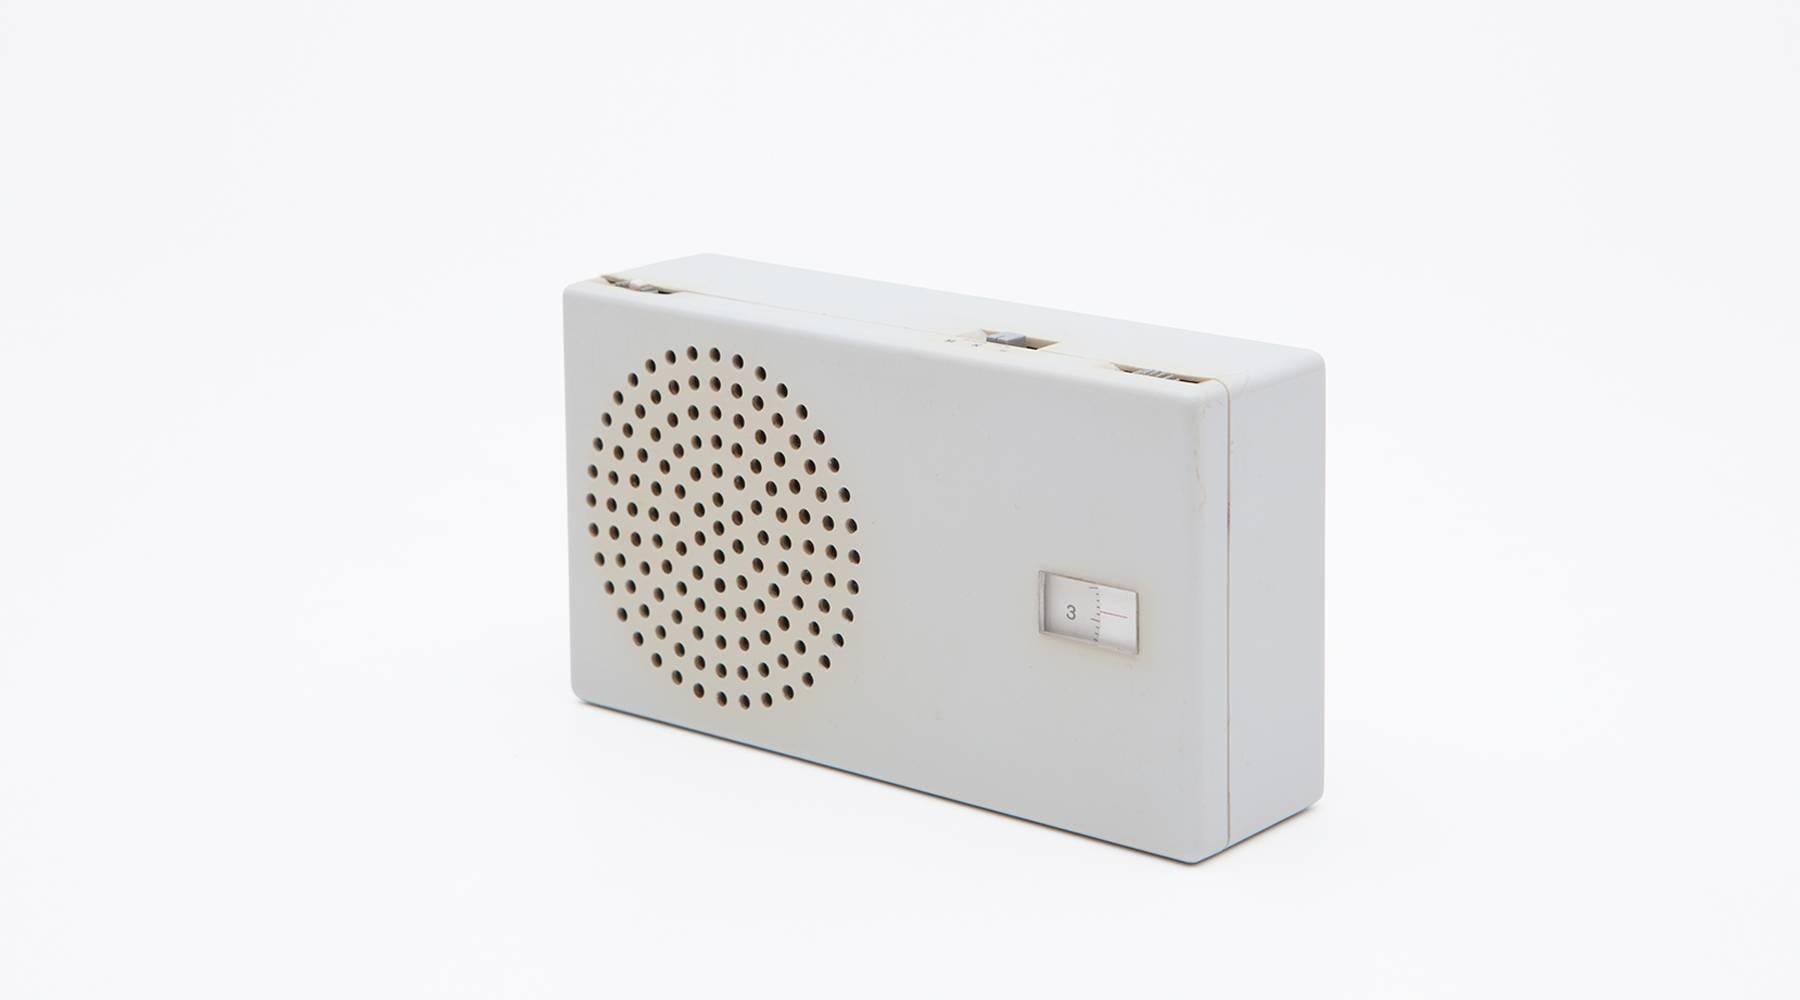 Spare modernist desk radio designed by Dieter Rams who is a German industrial designer of the modern age. The aim of his designs is the clarity of the form, material suitability and ease of use. This original and rare piece devoid of extraneous